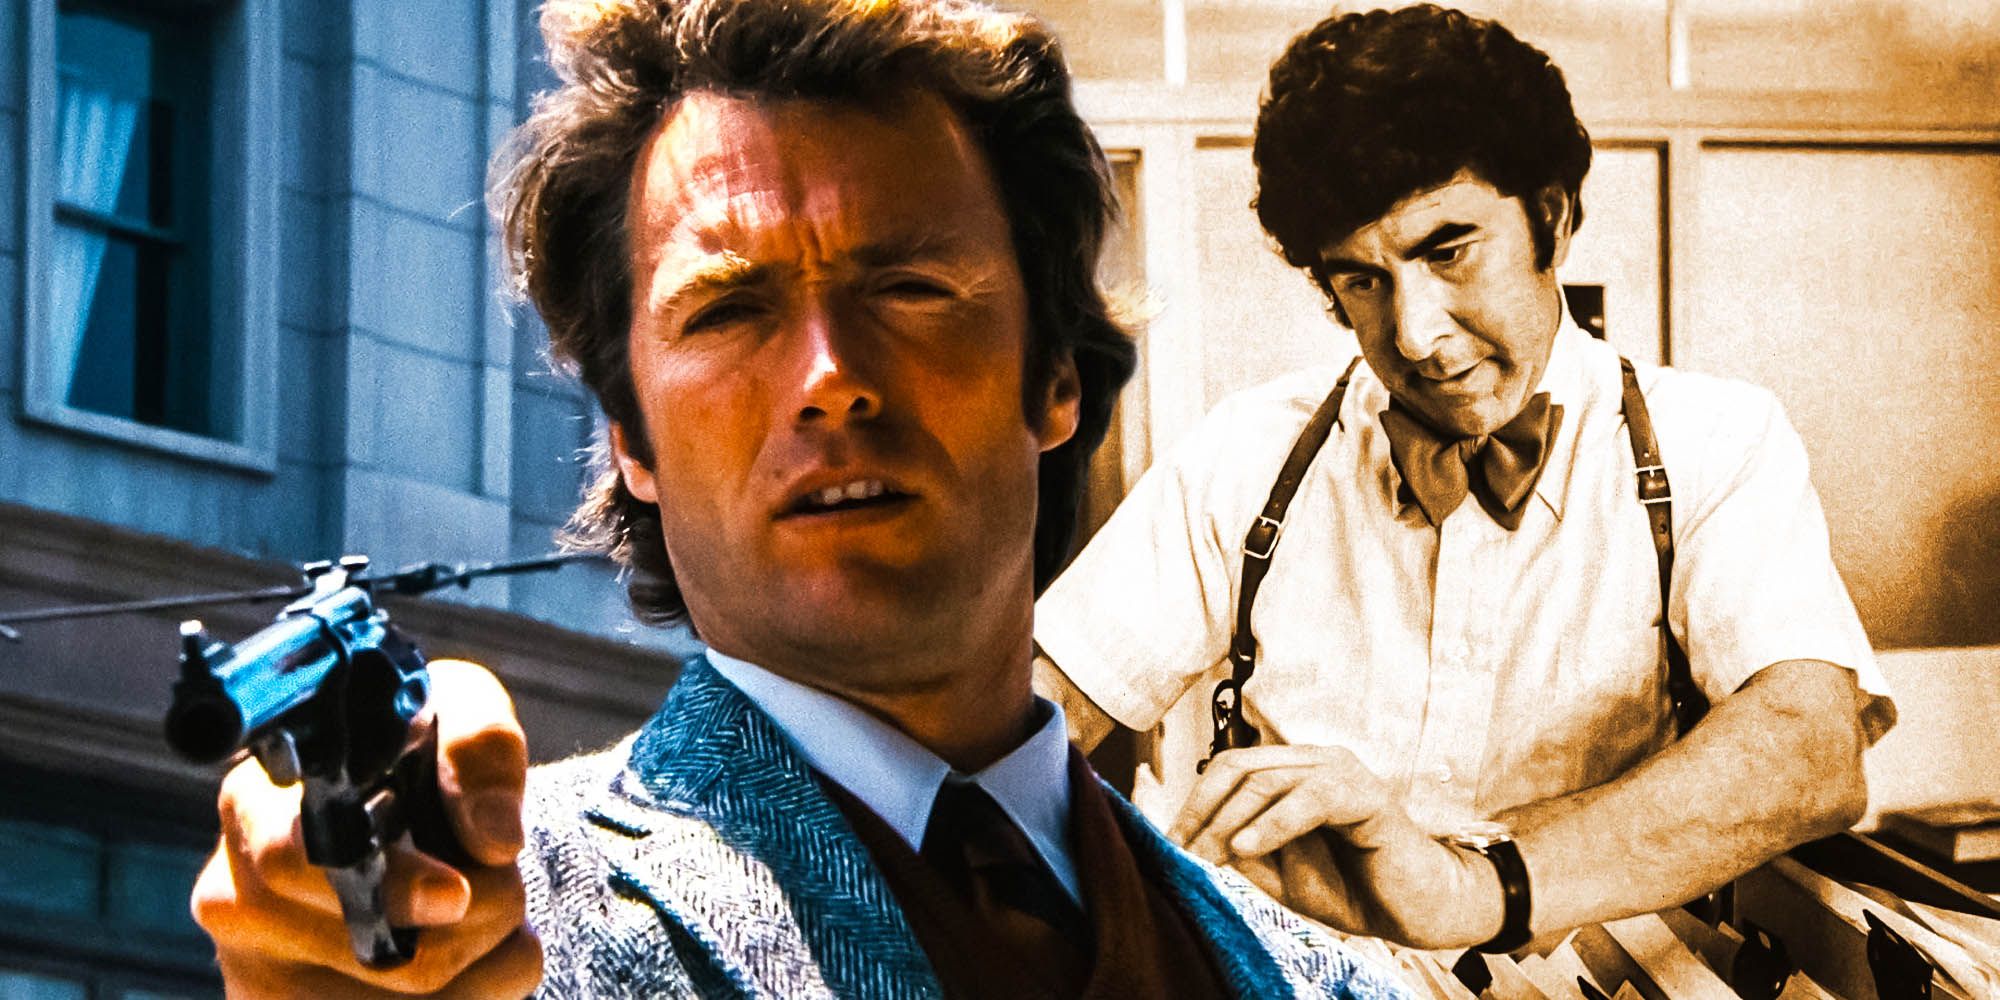 Clint eastwood Dirty harry real life zodia case dave Toschi